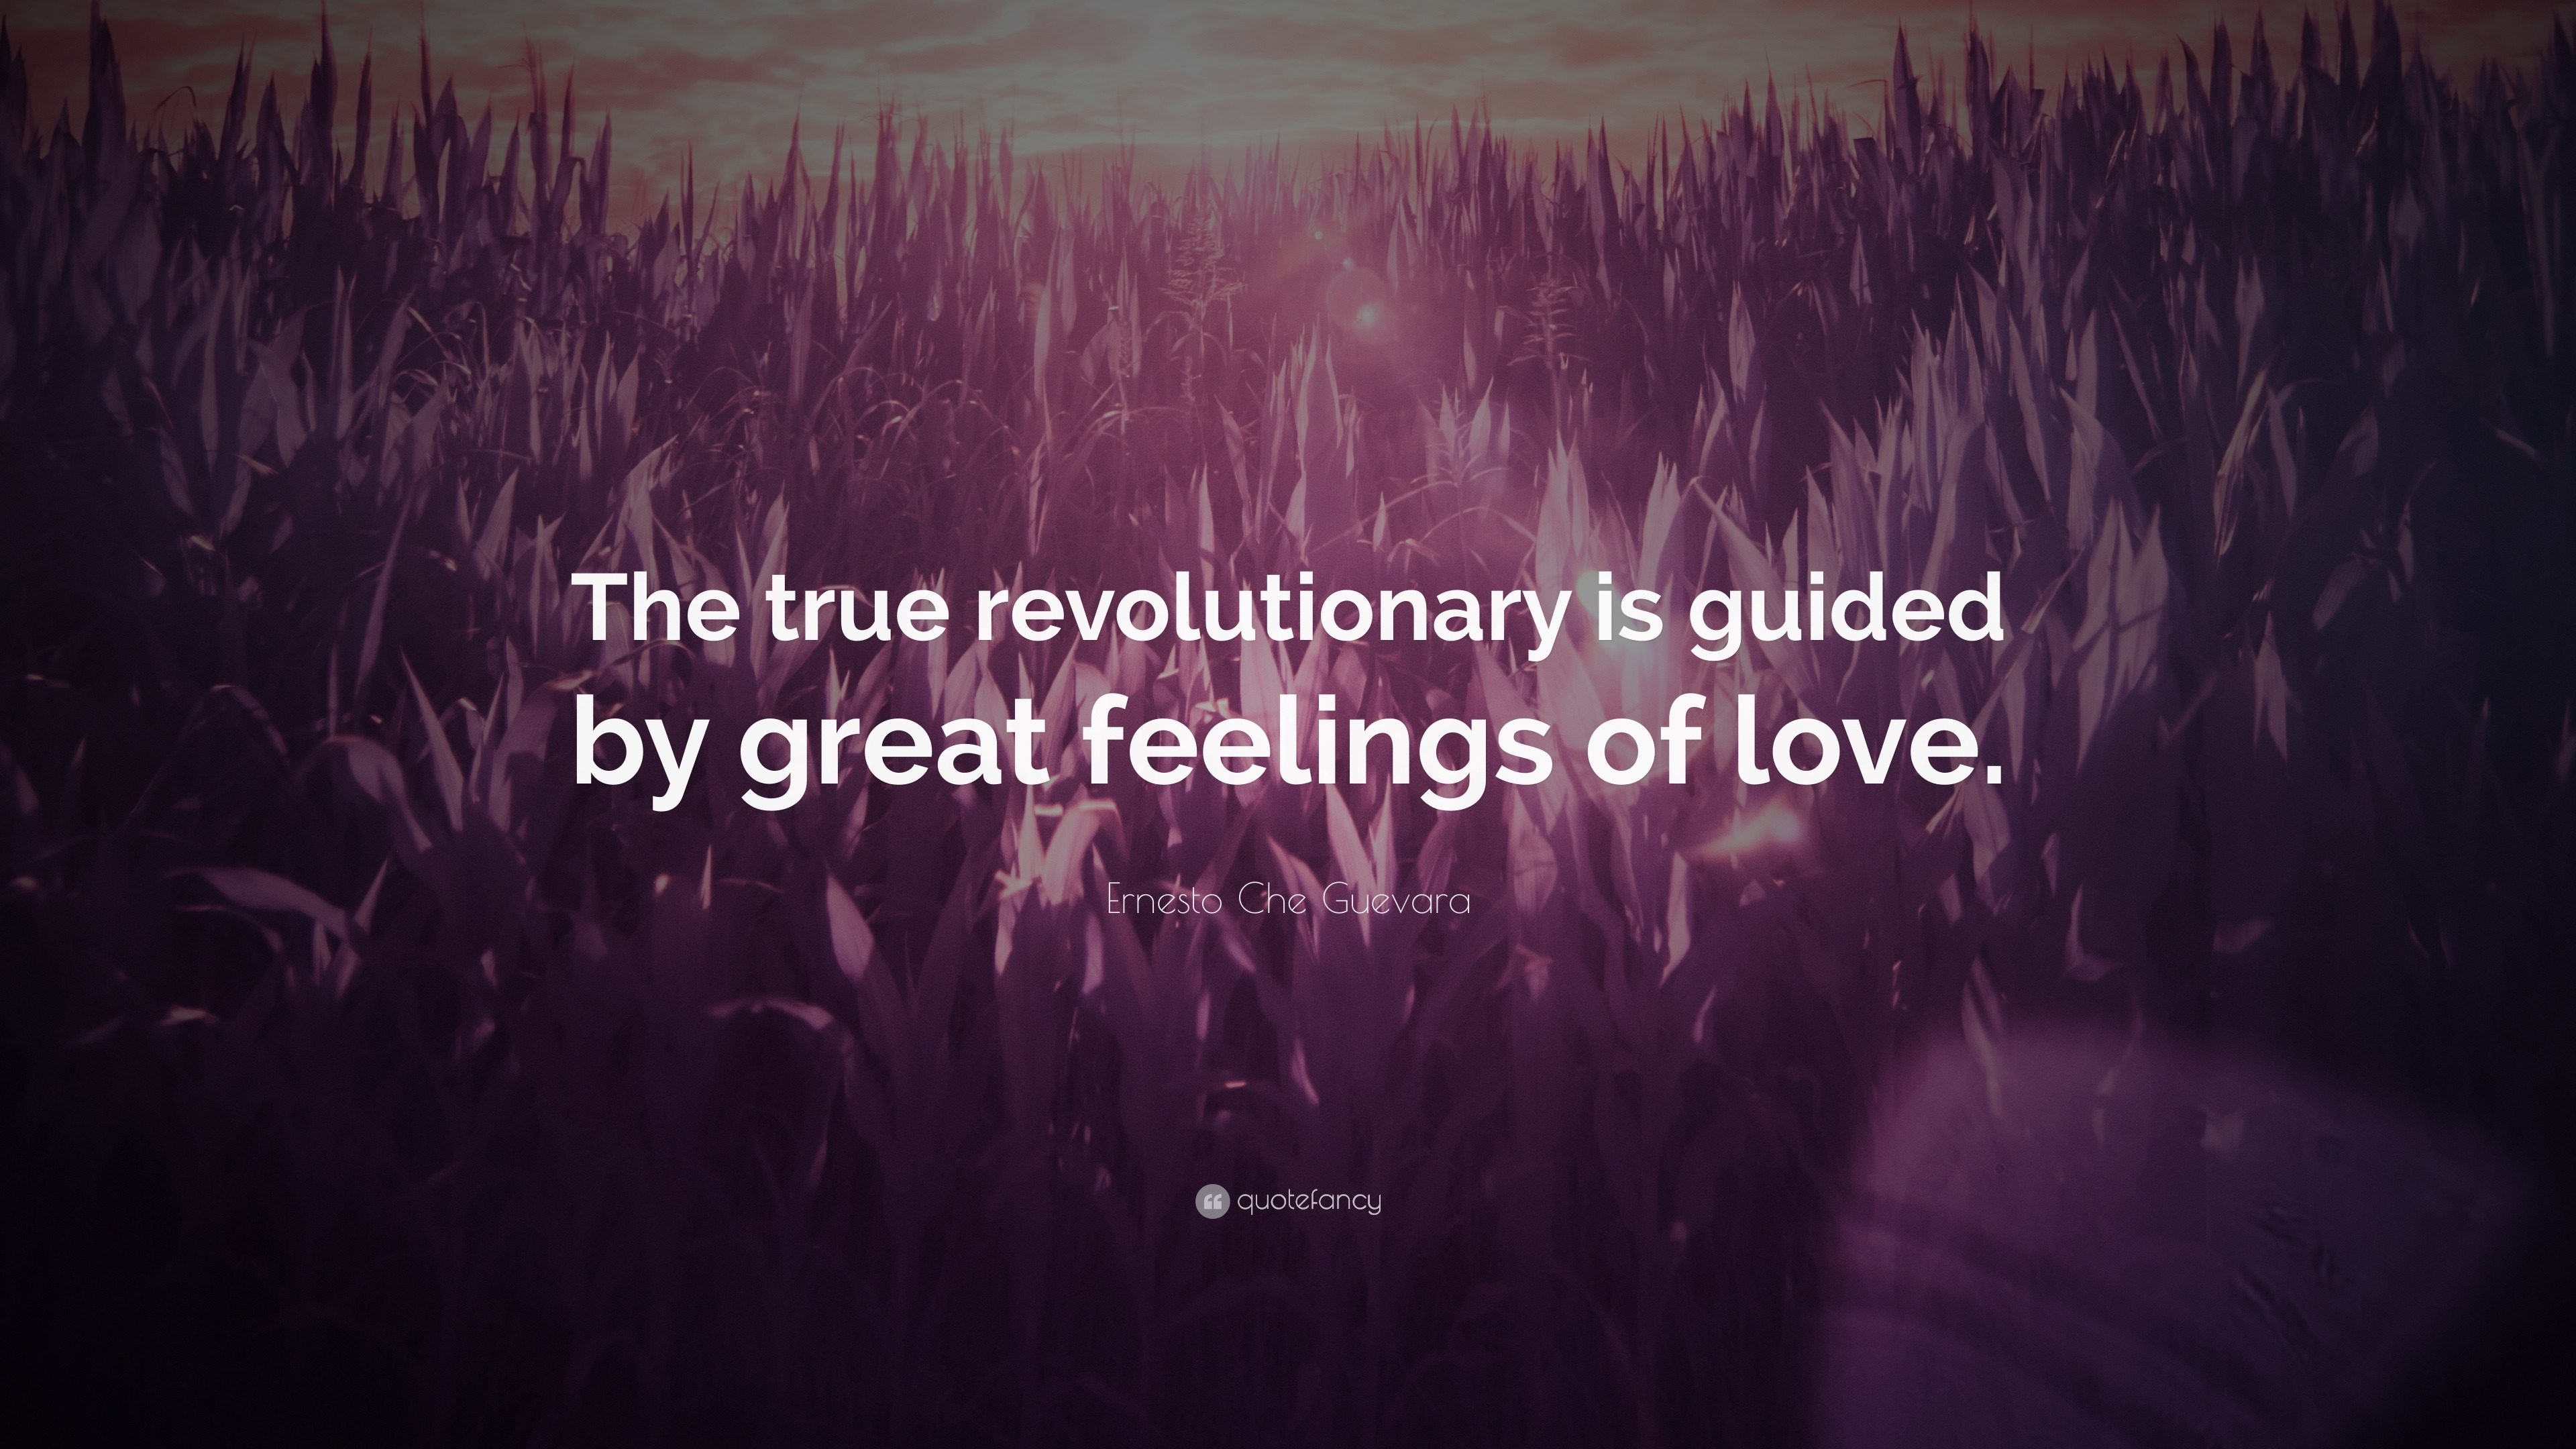 Ernesto Che Guevara Quote: "The true revolutionary is guided by great feelings of love." (11 ...